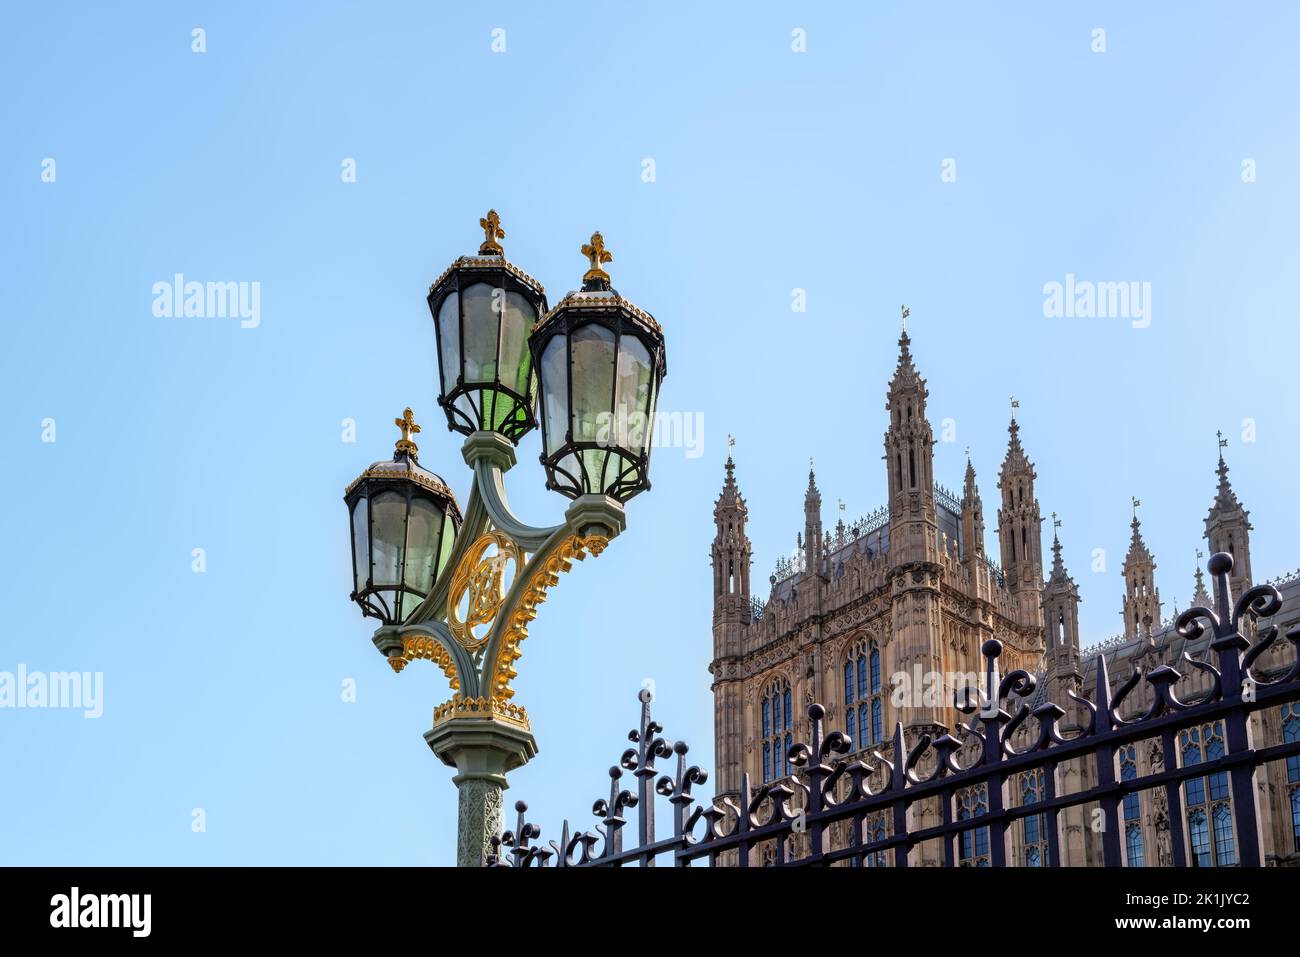 Decorative street light and wrought iron railings outside of the Houses of Parliament, London, UK. Blue sky background with space for text. Stock Photo